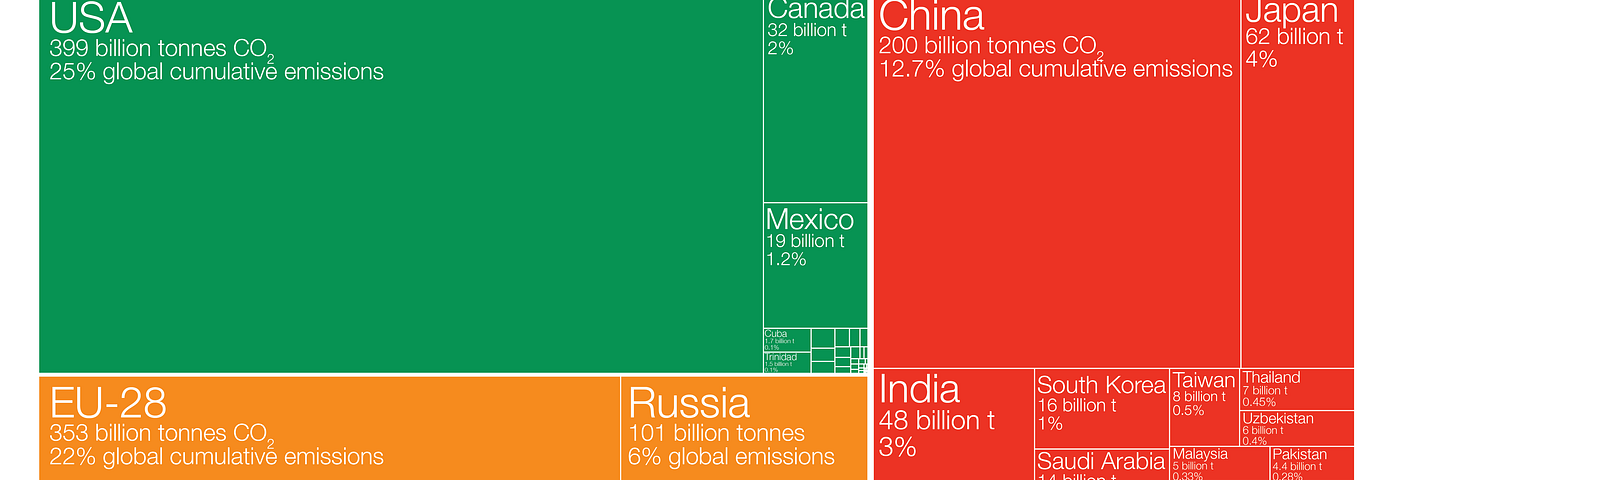 Diagram of historical CO2 emissions share by countries showing USA and EU-28 as massively largest overall contributors